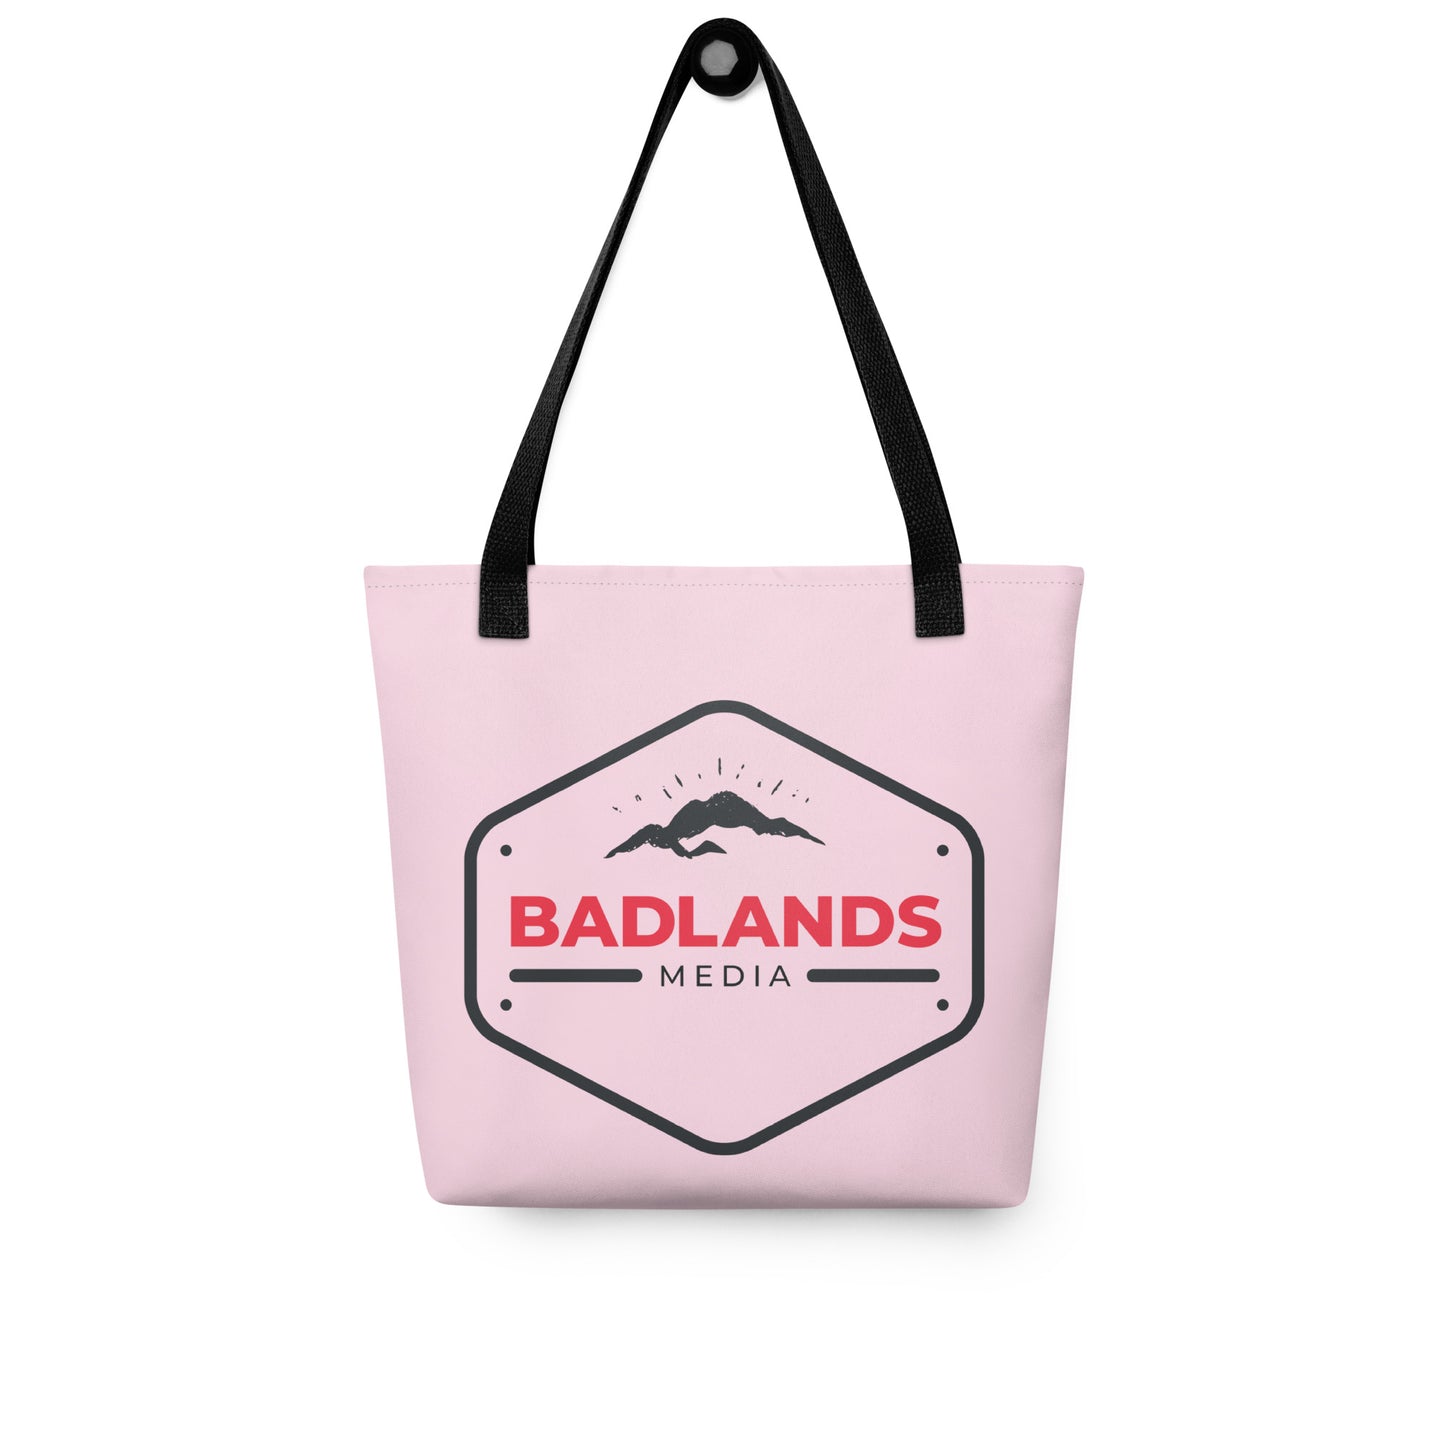 Badlands Tote Bag in cotton candy